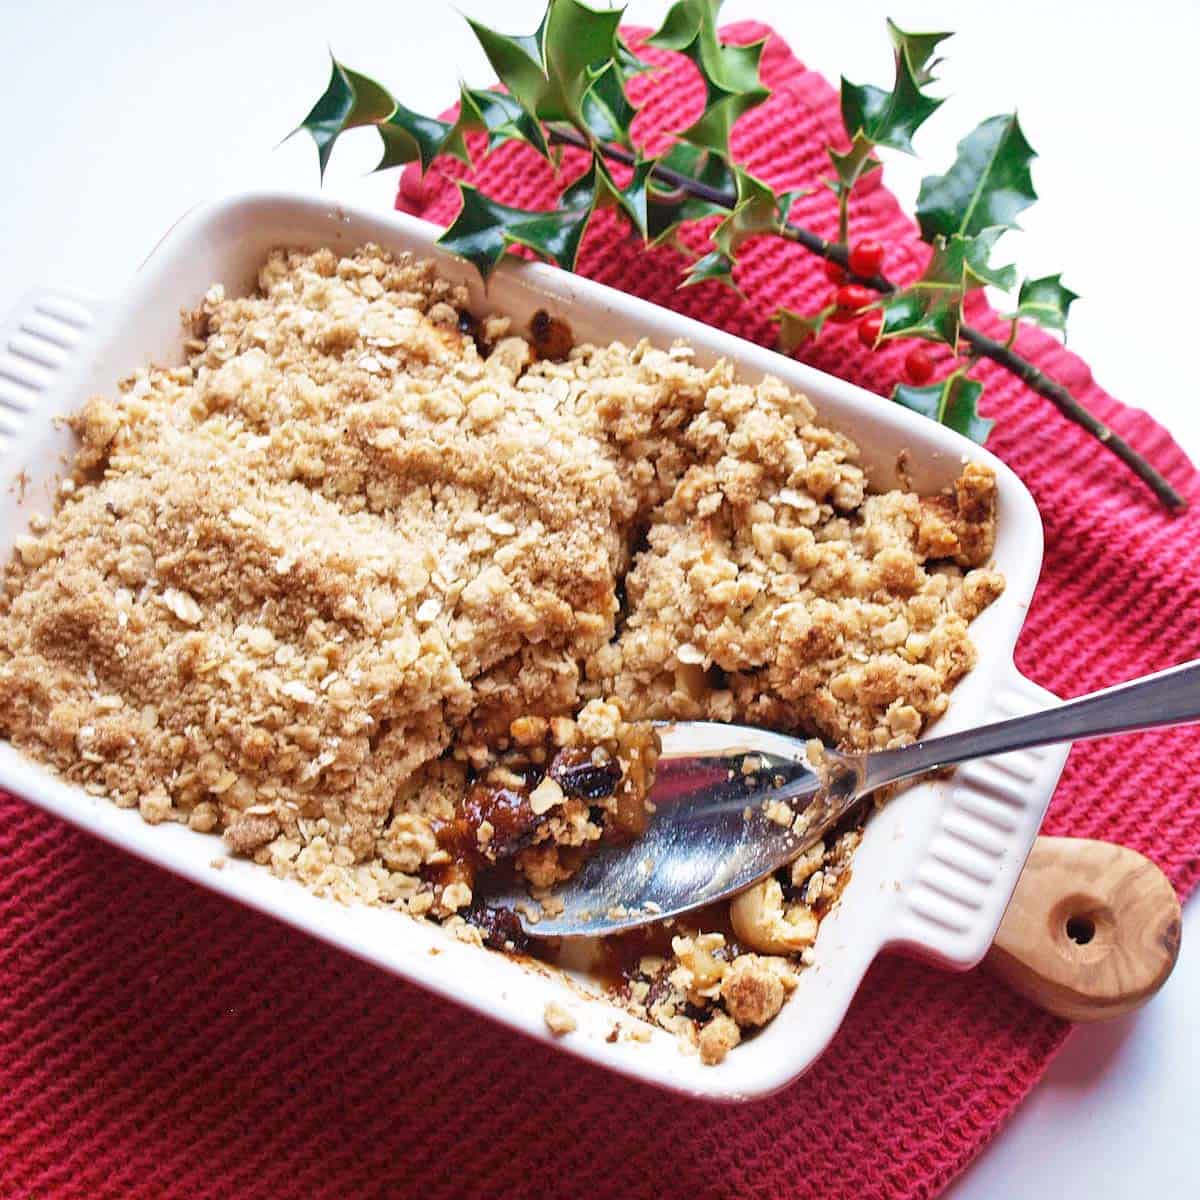 Mincemeat and Apple Crumble with holly